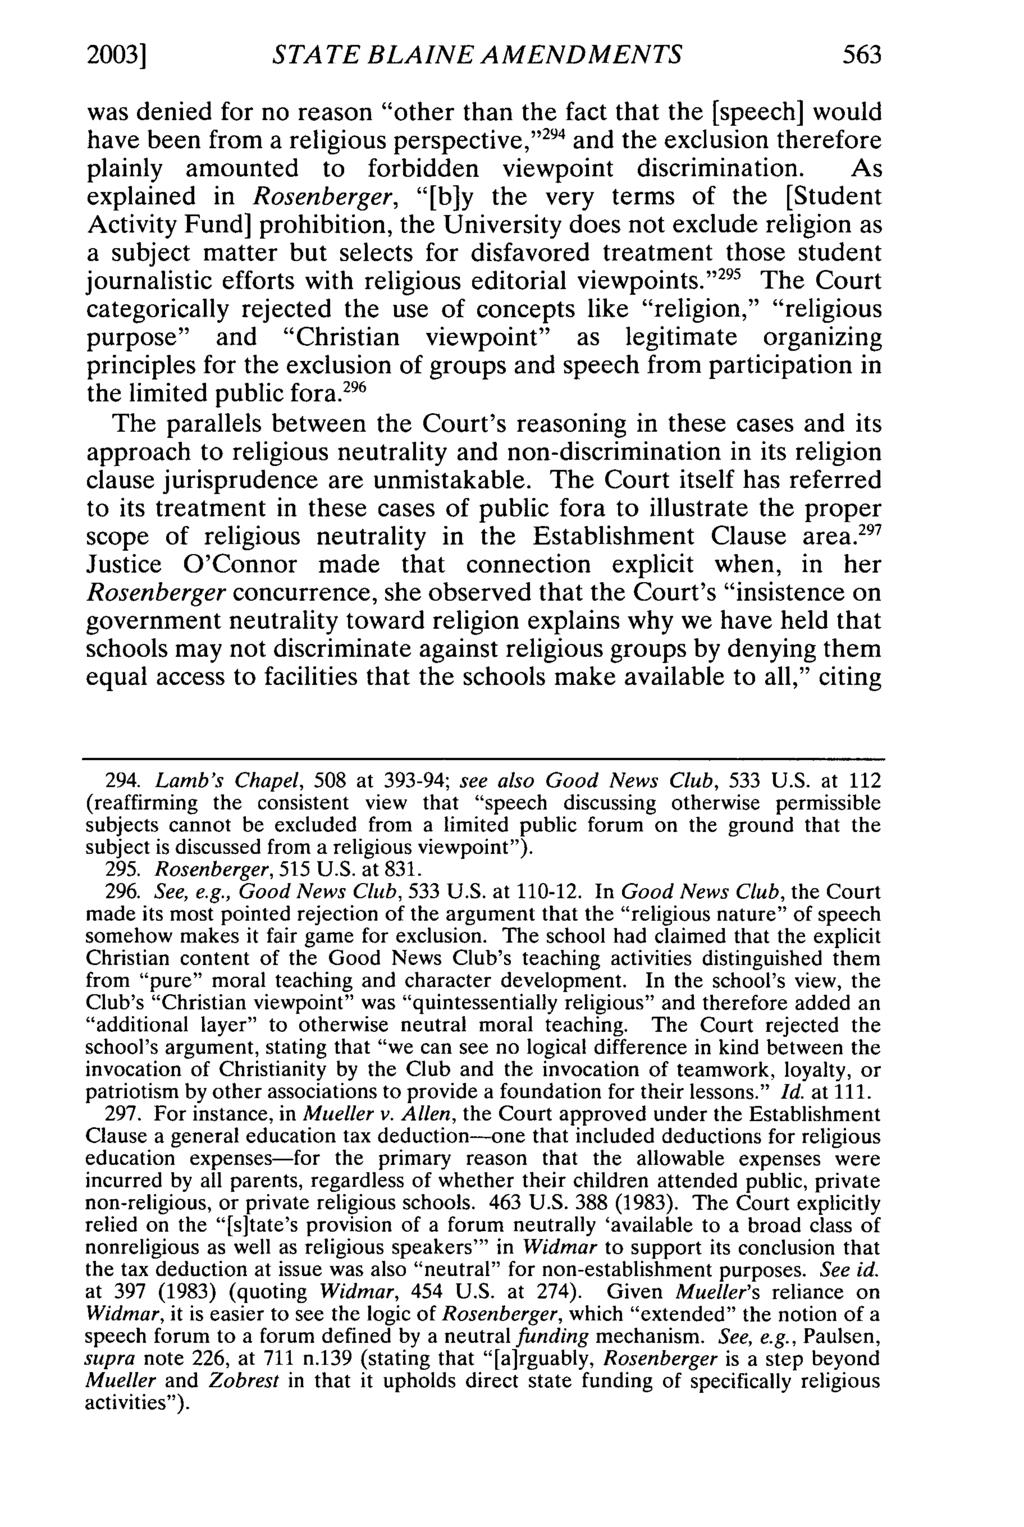 2003] STATE BLAINE AMENDMENTS was denied for no reason "other than the fact that the [speech] would have been from a religious perspective, ' 294 and the exclusion therefore plainly amounted to